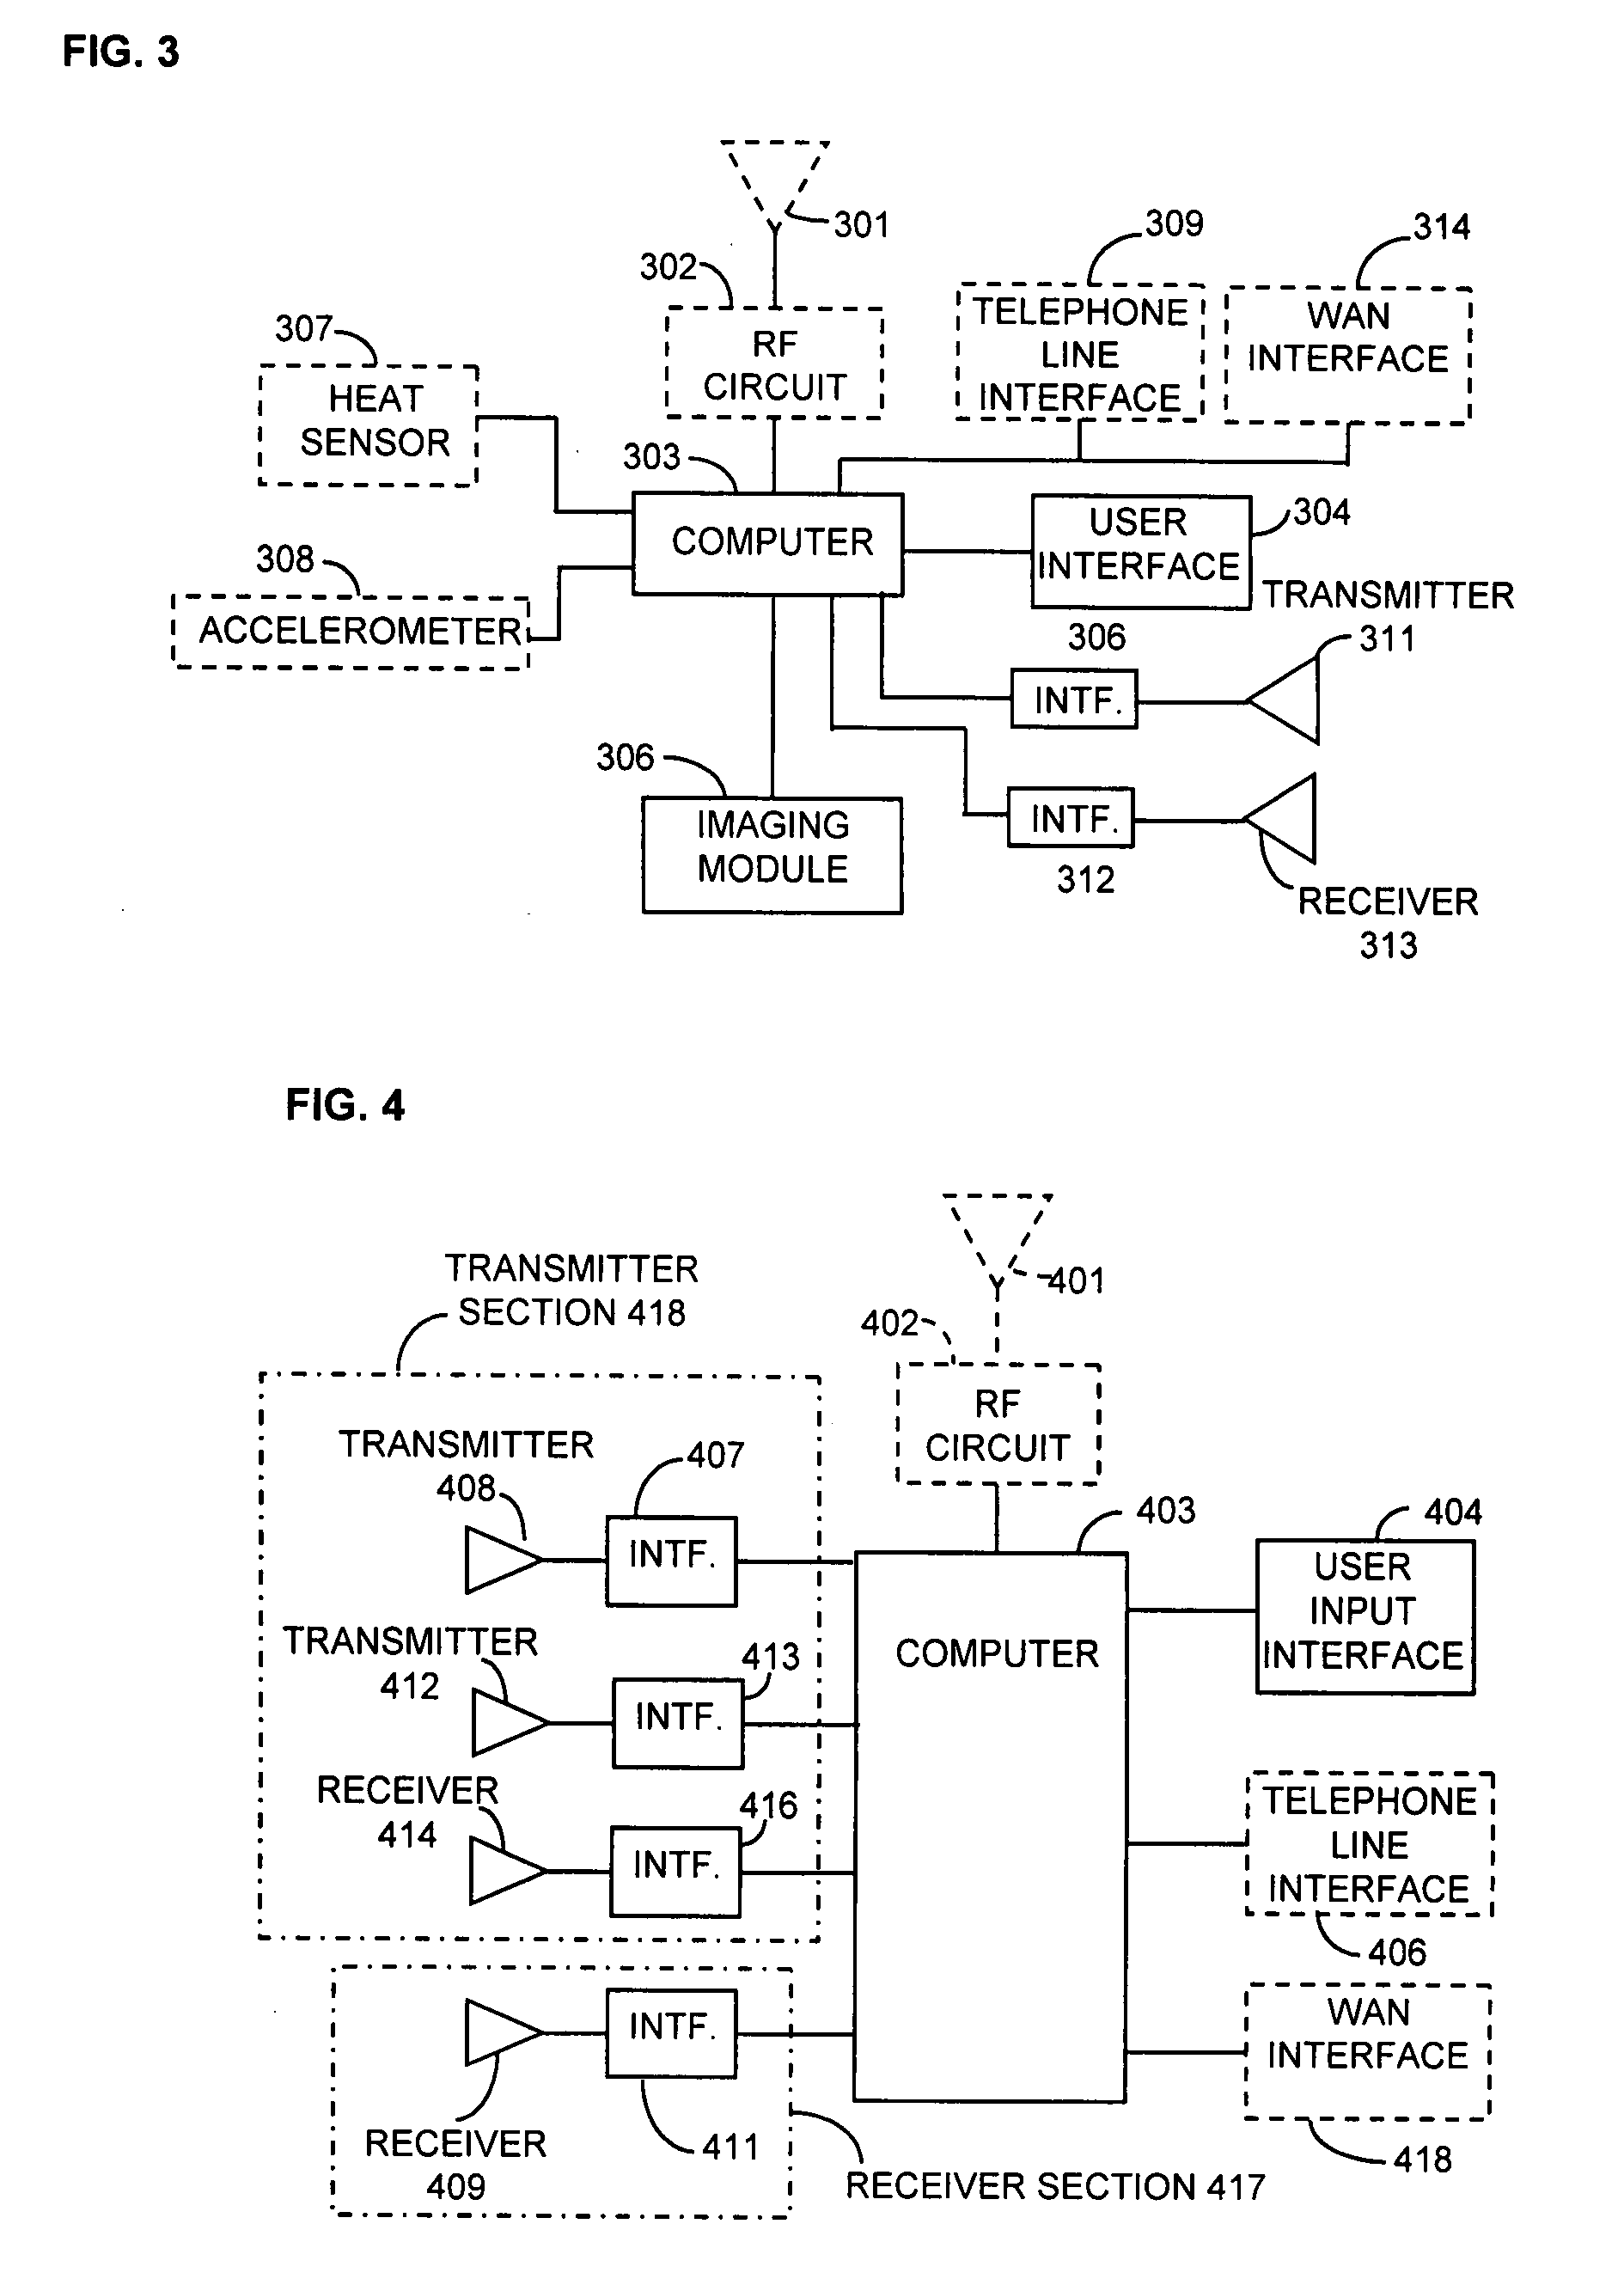 Method and apparatus for controlling access and presence information using ear biometrics